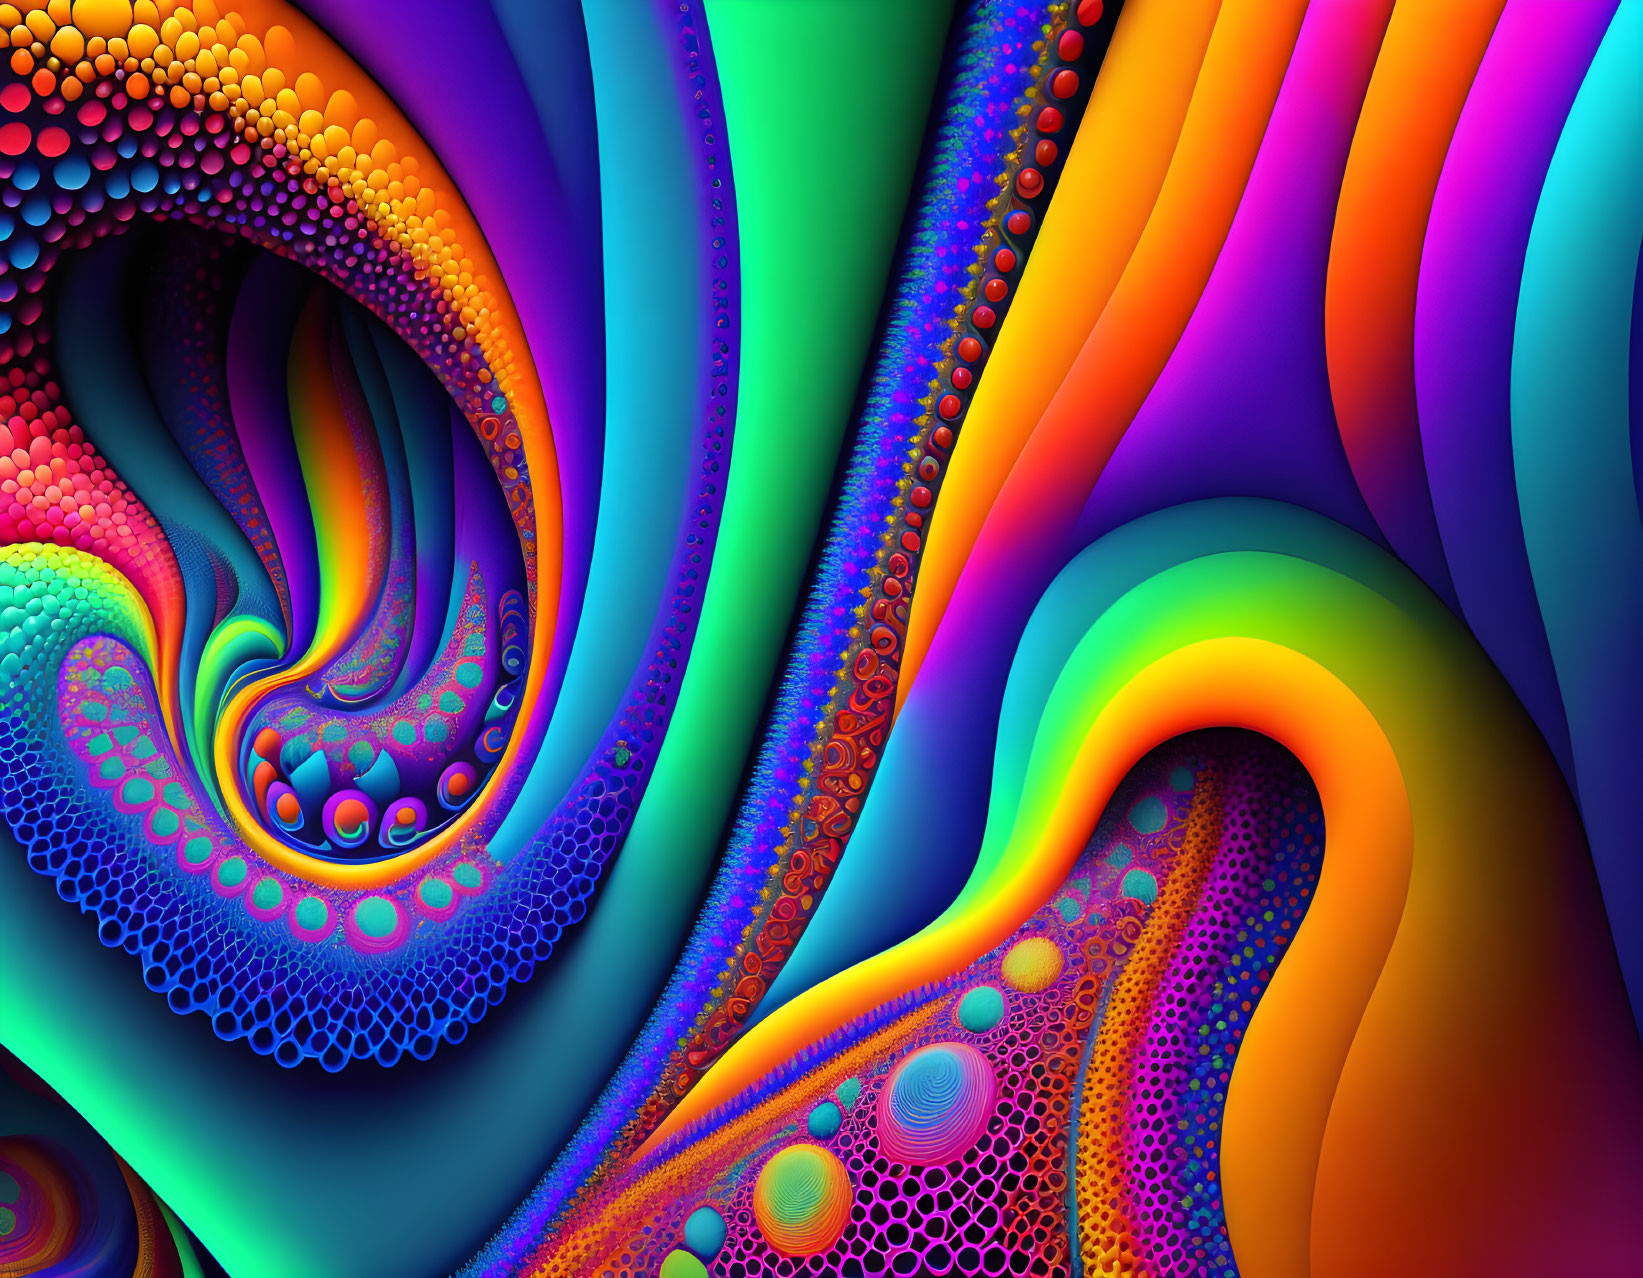 Colorful Digital Fractal Art with Swirling Patterns in Purple and Orange